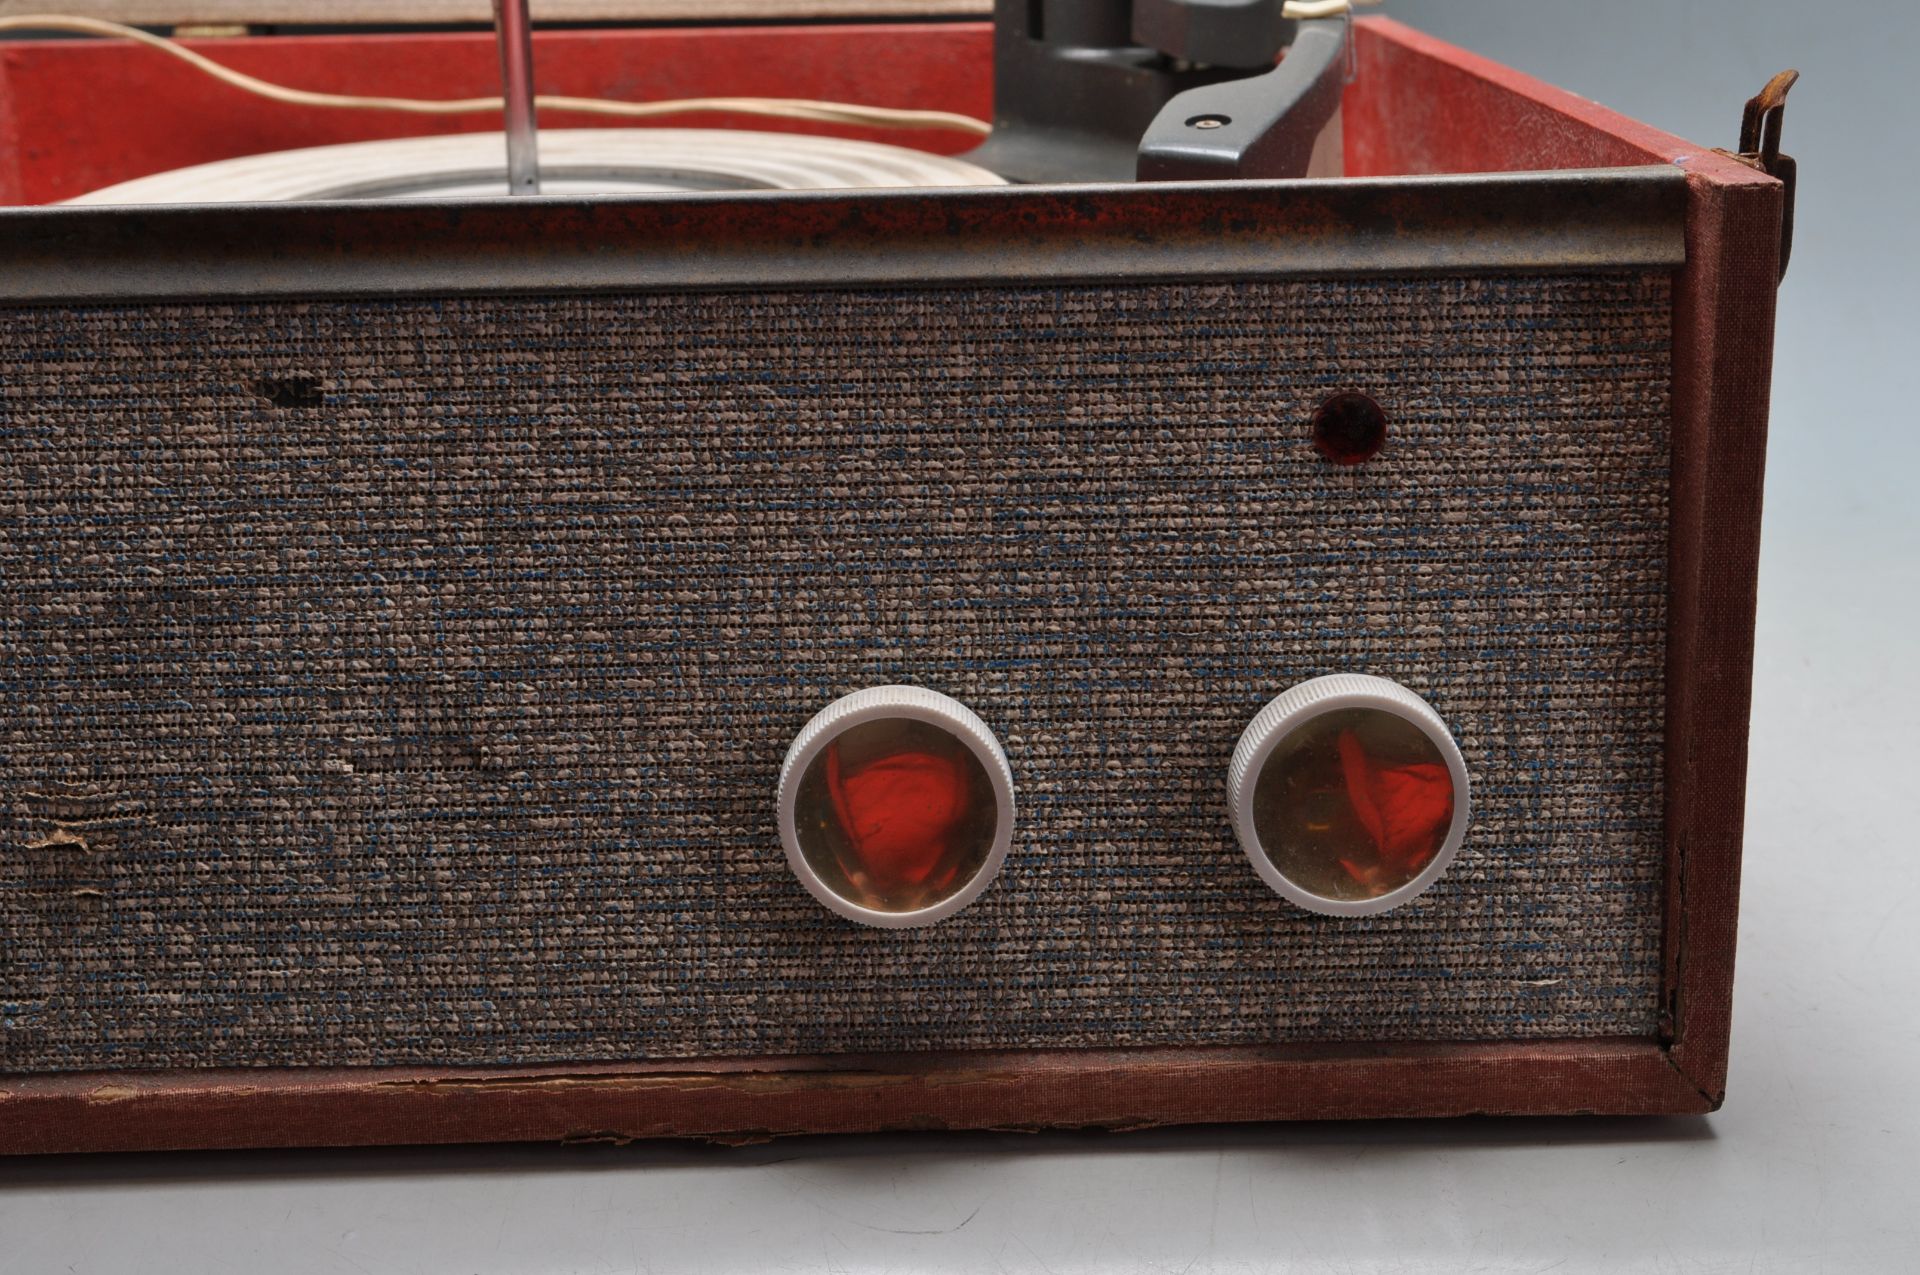 A VINTAGE RETRO ELIZABETHAN POP TEN RECORD PLAYER IN RED AND CREAM - Image 4 of 6